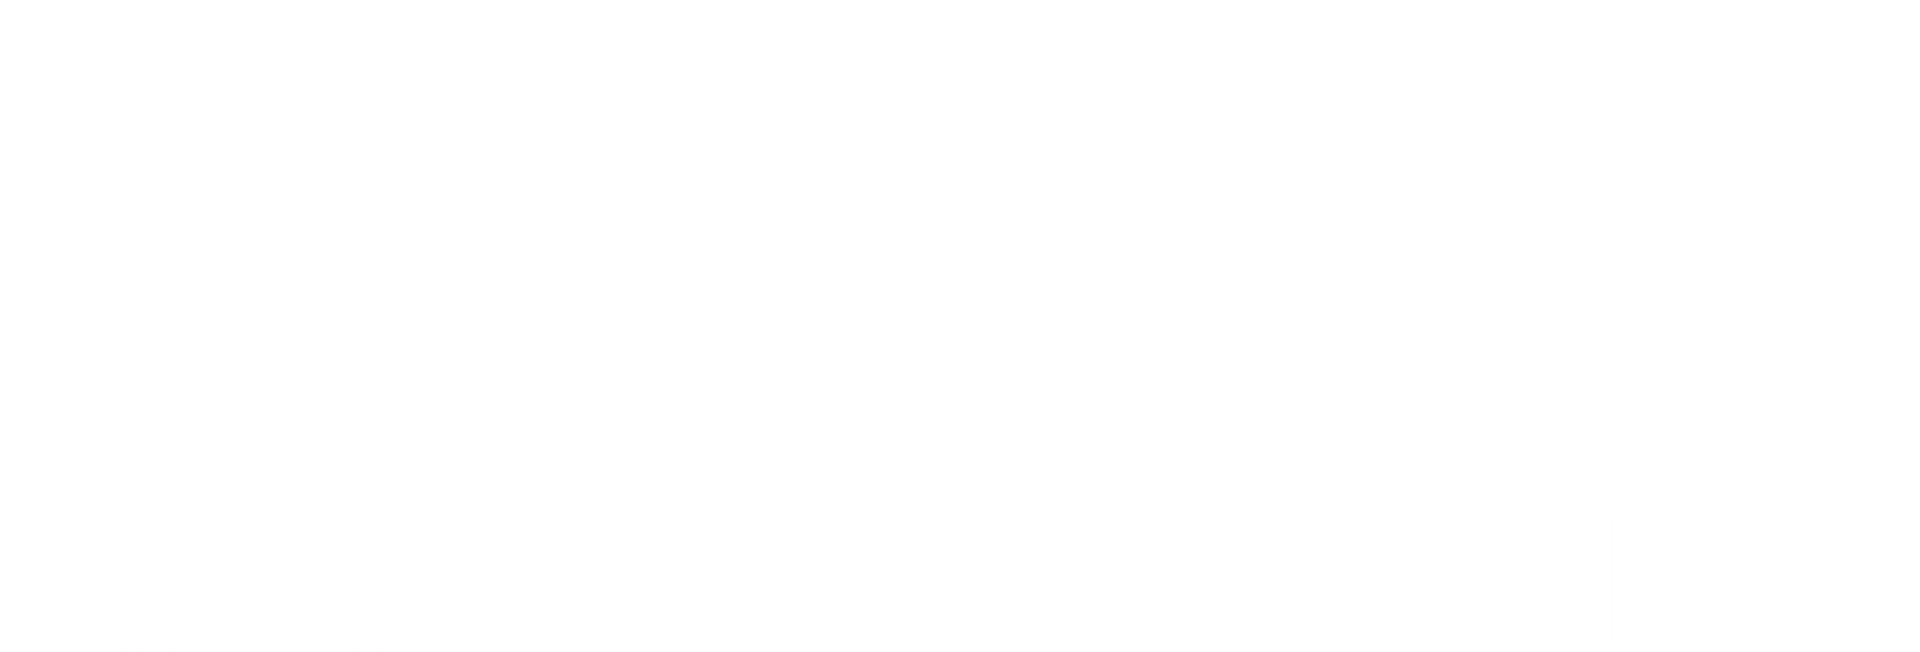 Landscaping and Lawn Care